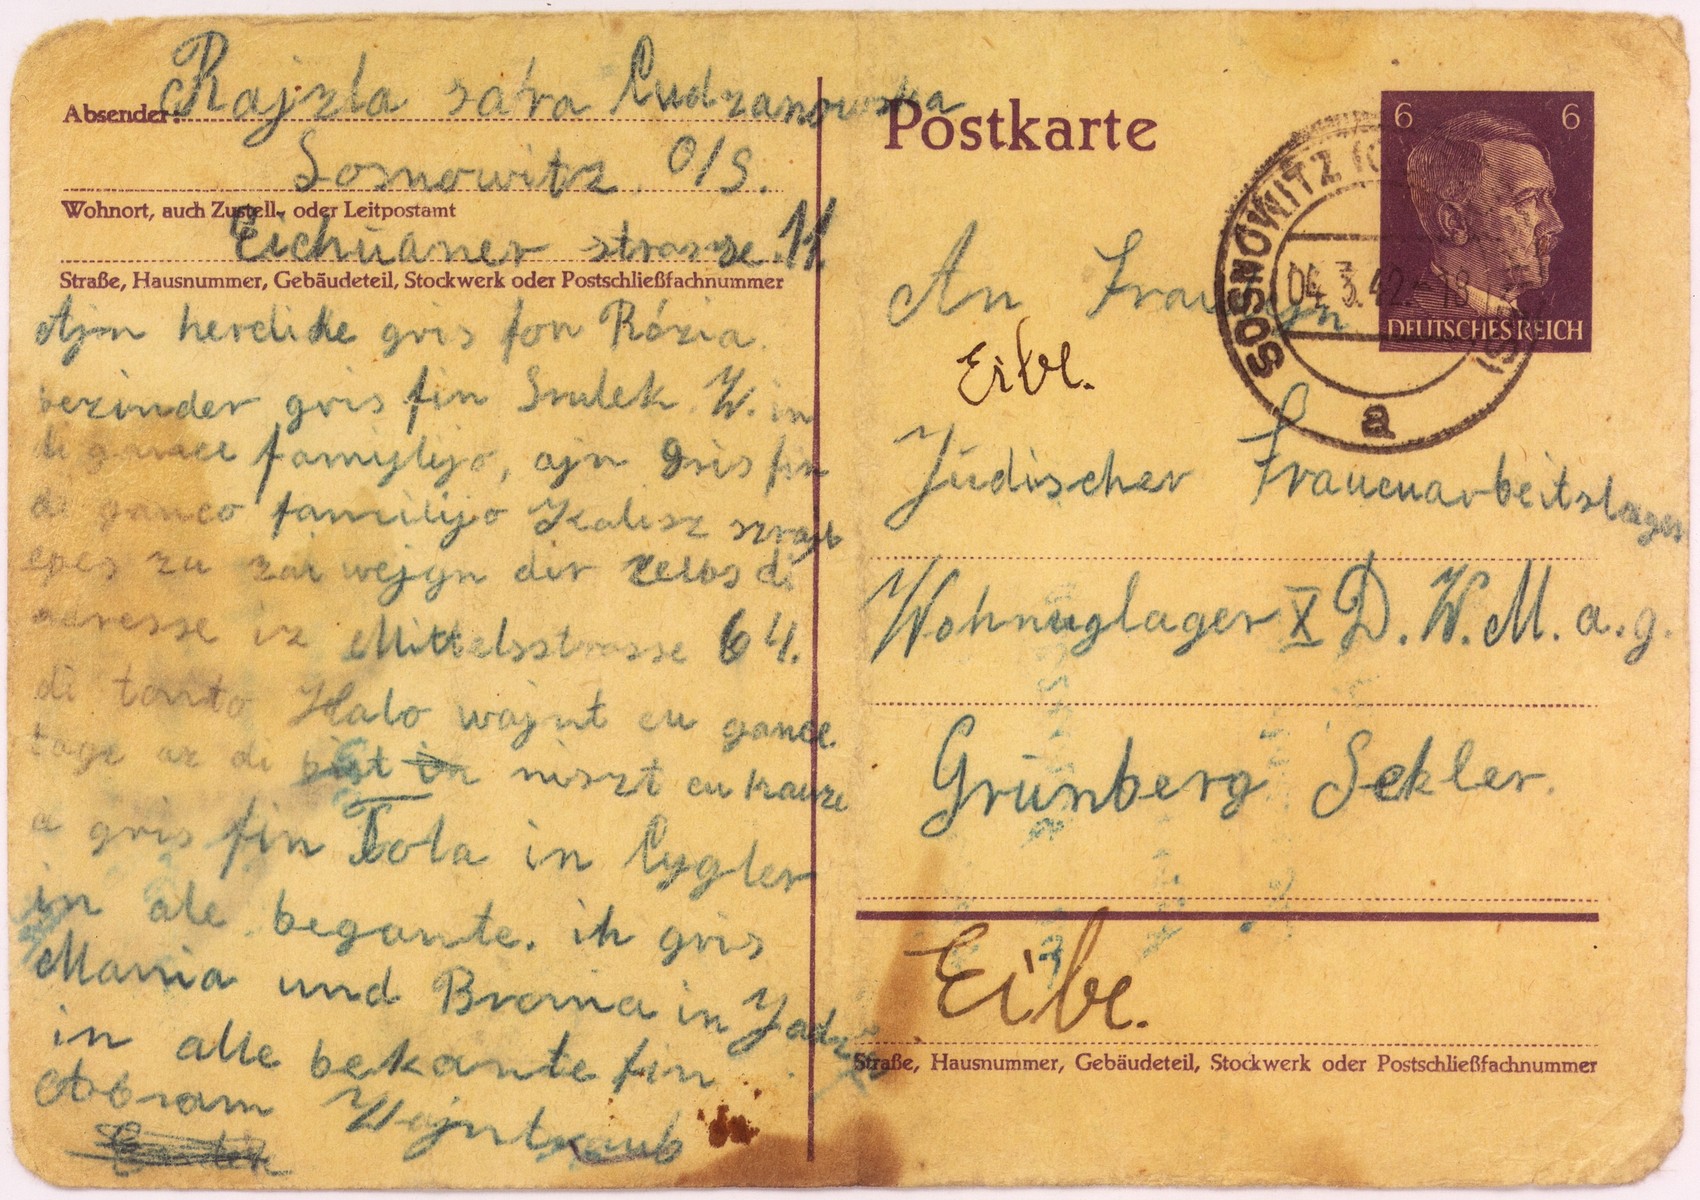 Postcard from Rajzla Cudzanowska, aunt of the donor, Helen Luksenburg.  This postcard was sent on March 4, 1942 from Sosnowiec to Rajzl's daughter and sister in the Gruenberg labor camp.